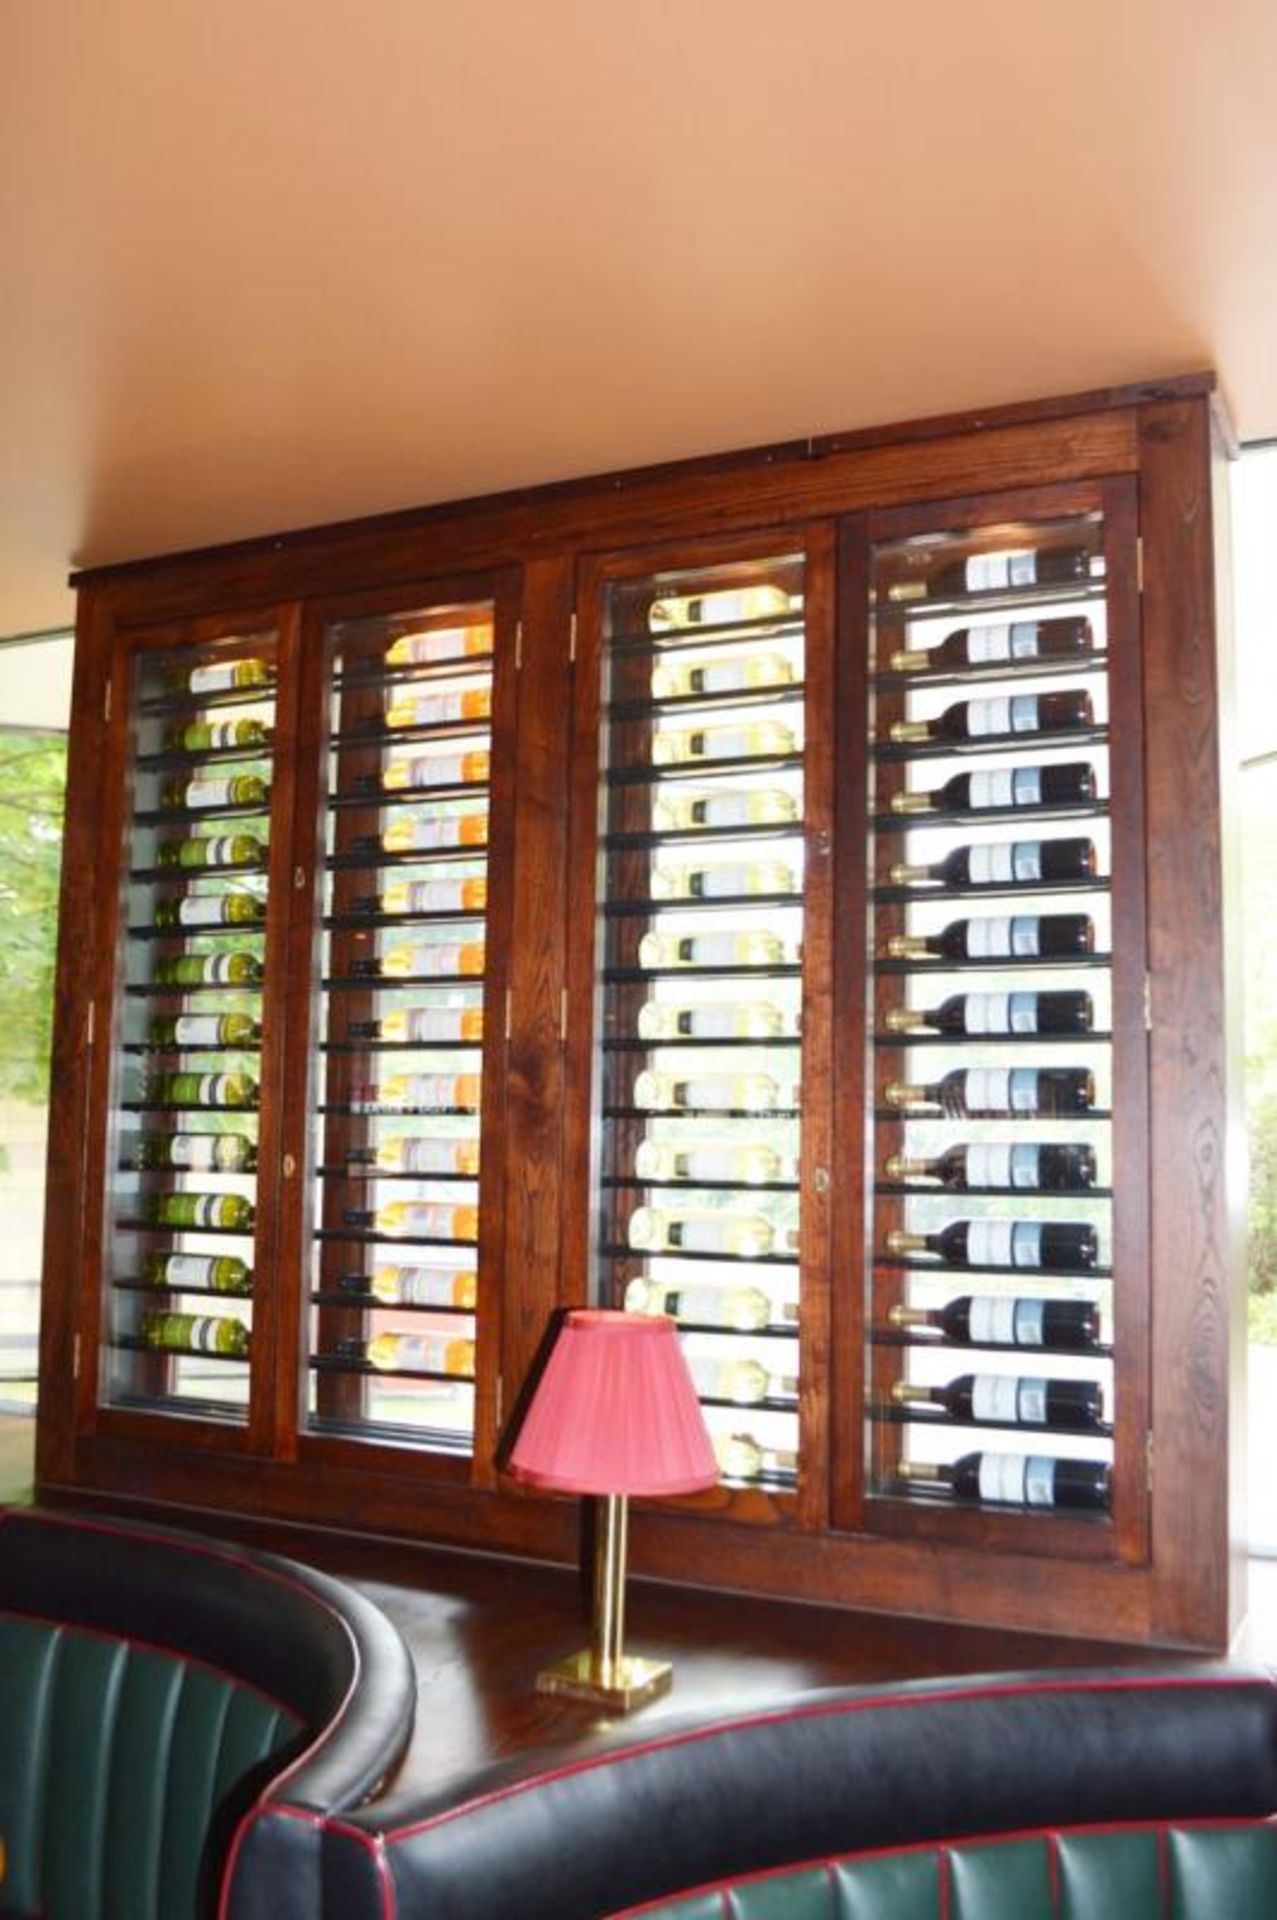 1 x Large Four Door Wine Bottle Display Cabinet With a 52 Bottle Capacity - H175 x W210 x D22 - Image 5 of 7